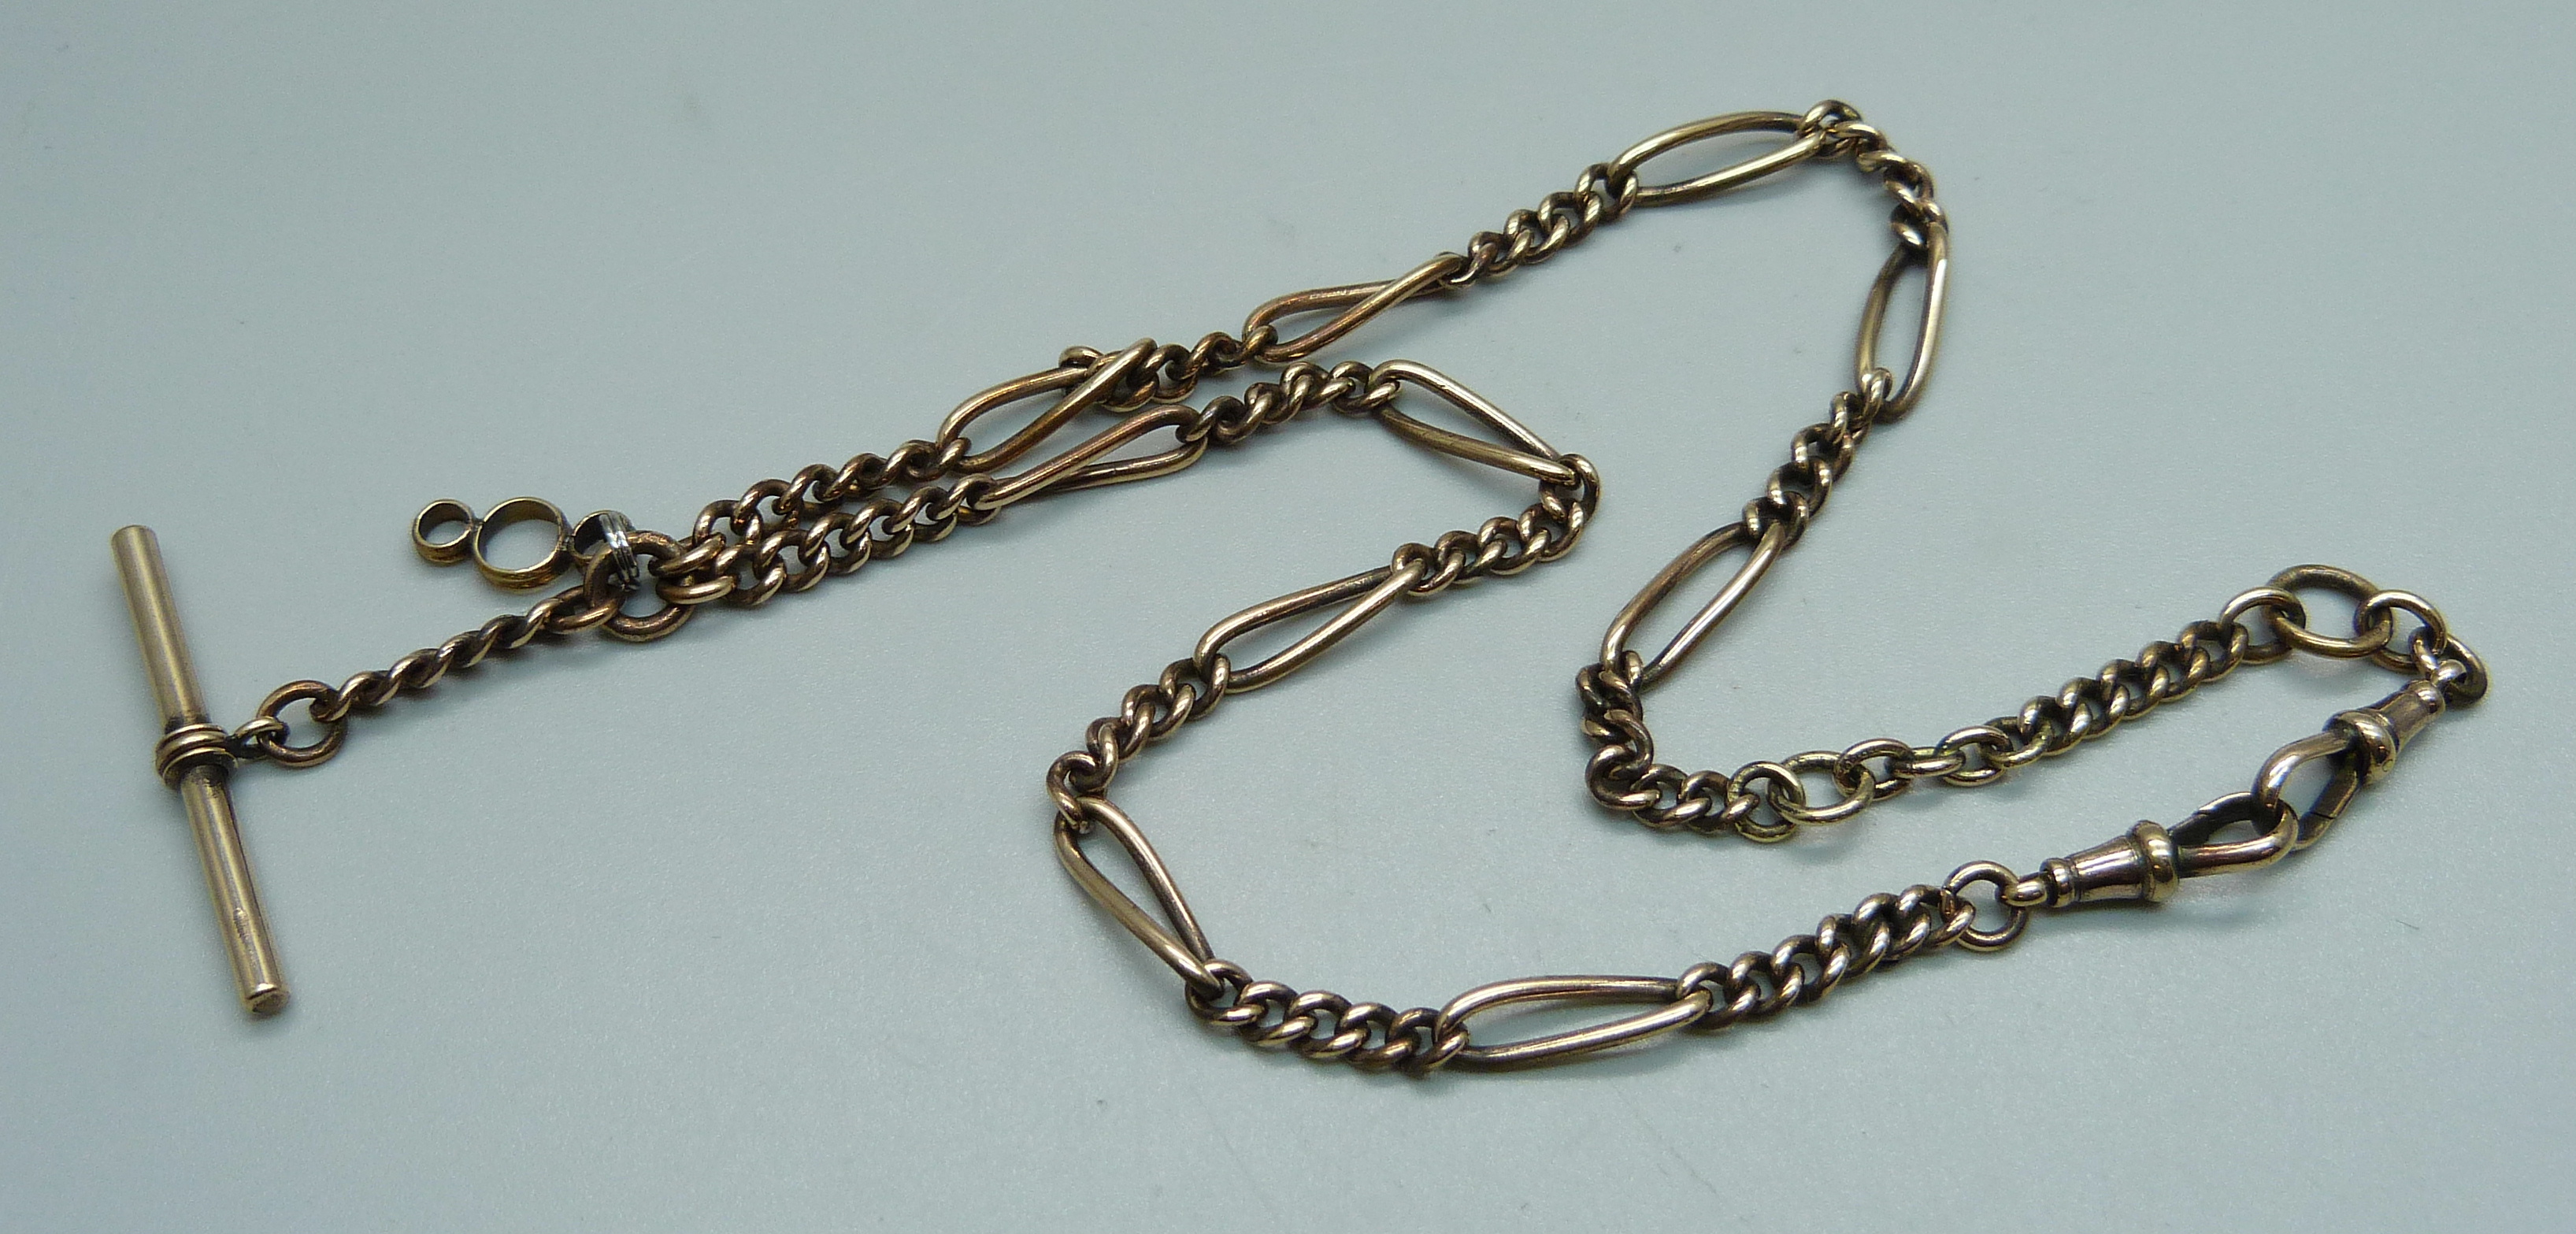 A plated double Albert watch chain